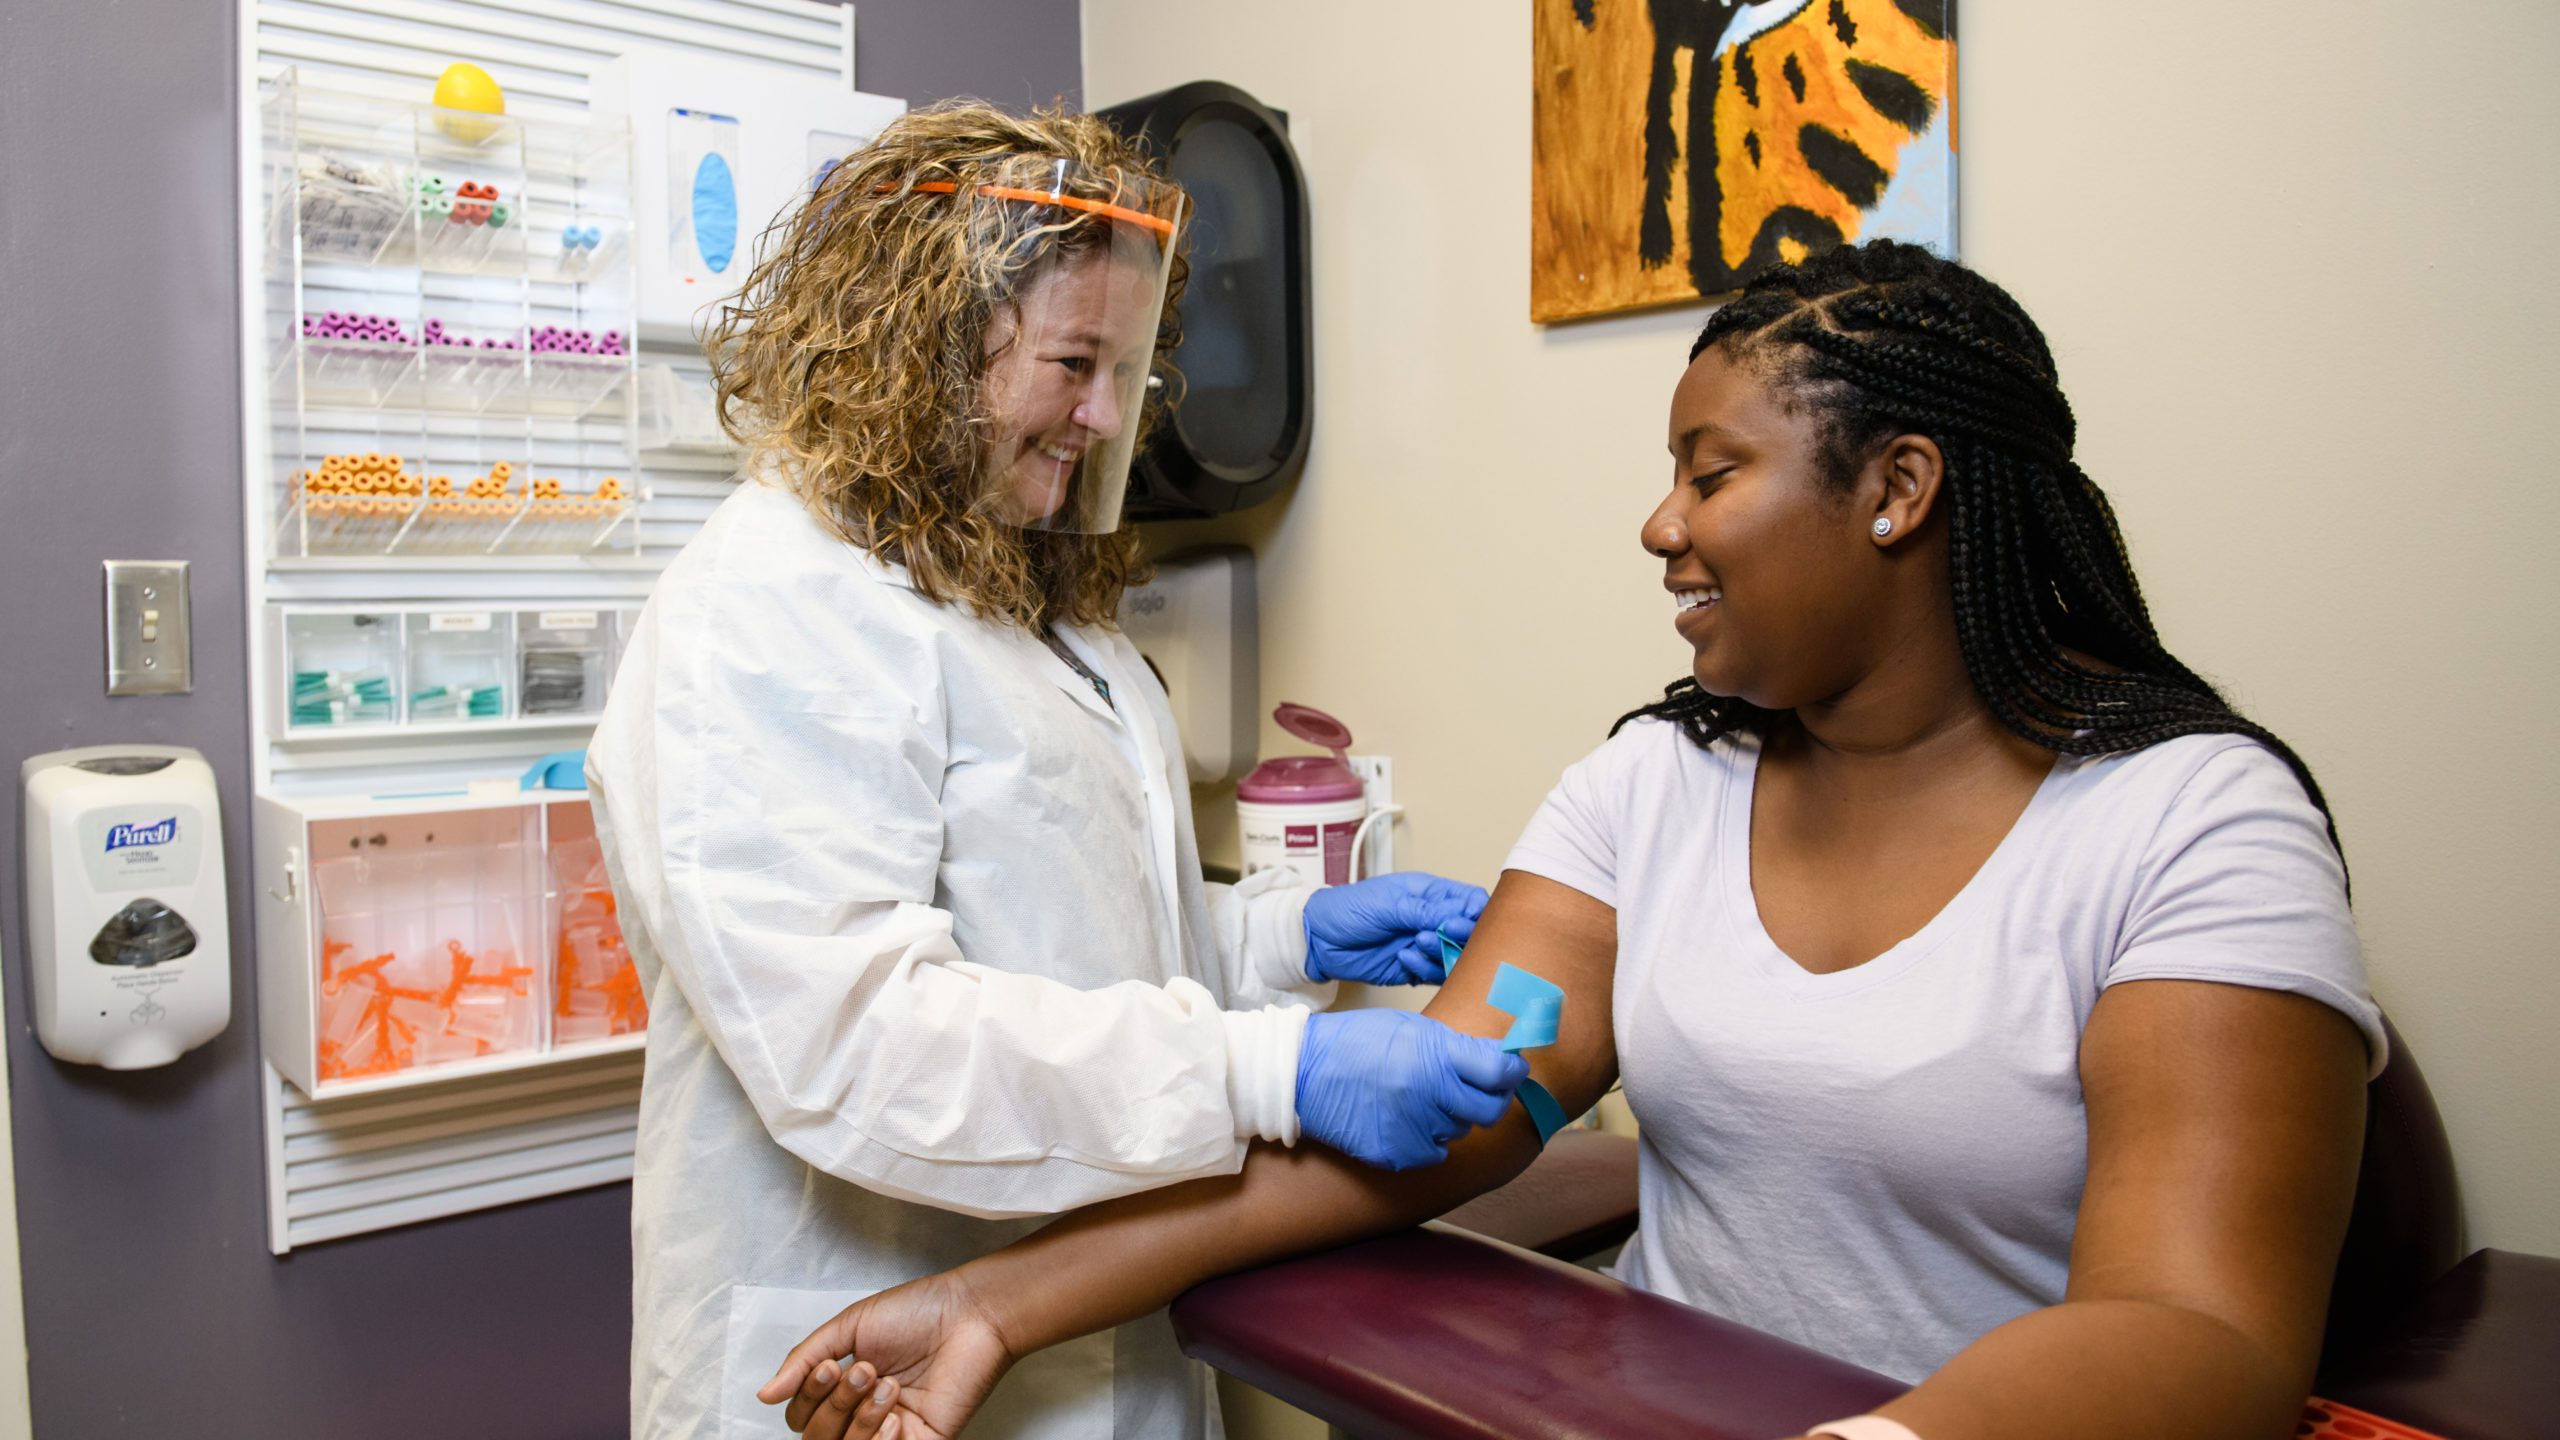 Mary Stuart Turner, laboratory supervisor at Redfern Health Center, works with a student in Fall 2021